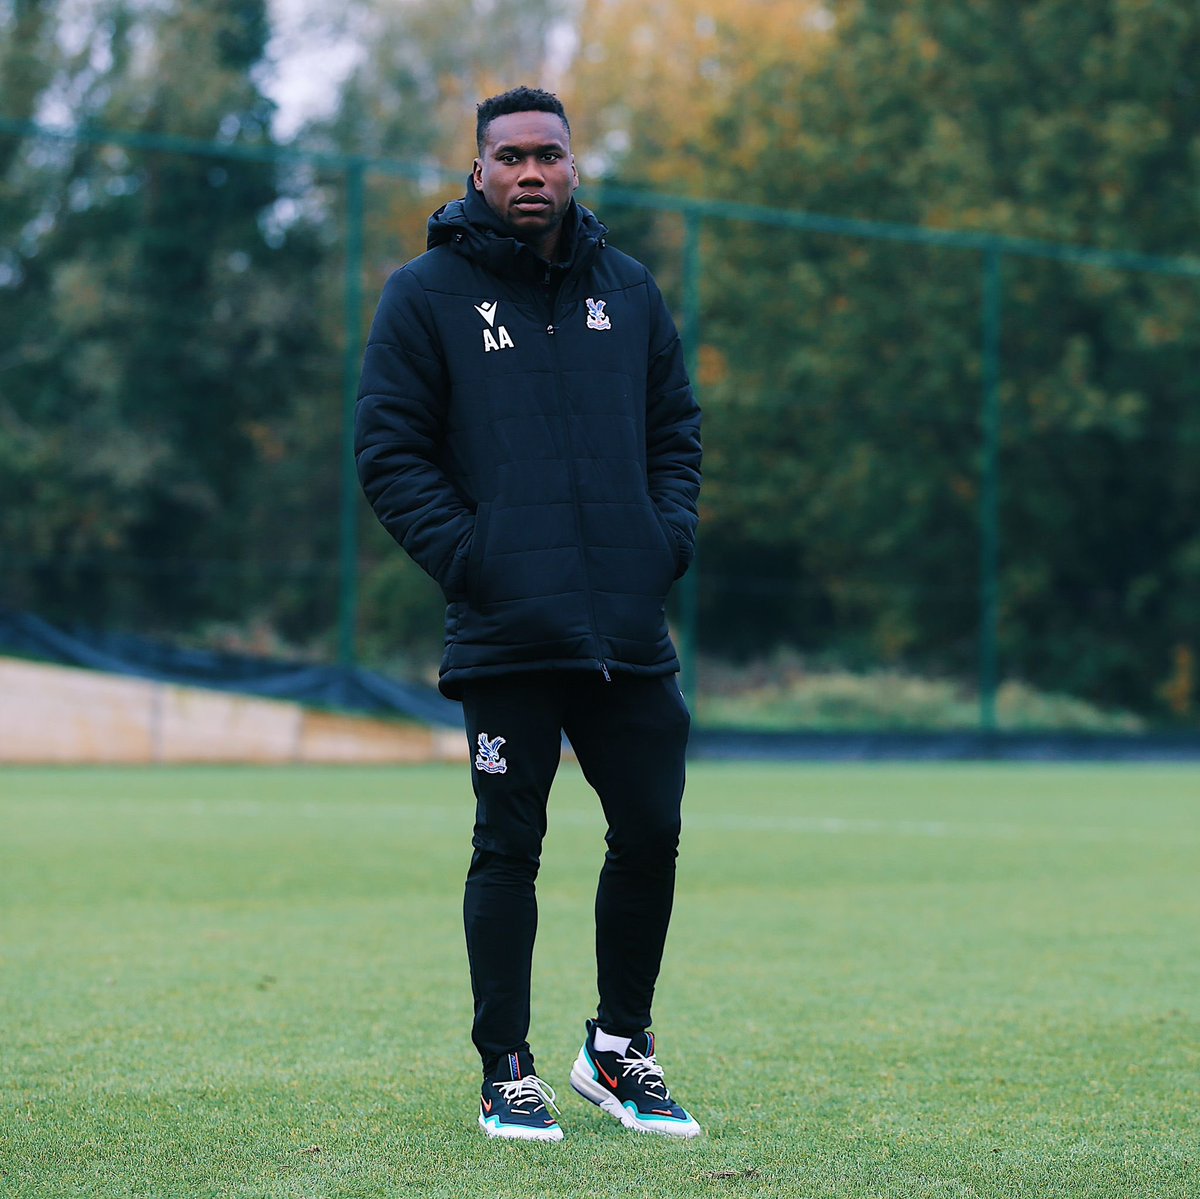 BOOM 💥 Millwall have poached top scout Ade Adeniran from Crystal Palace to be new head of recruitment. Millwall aiming to get back, securing top local talent.